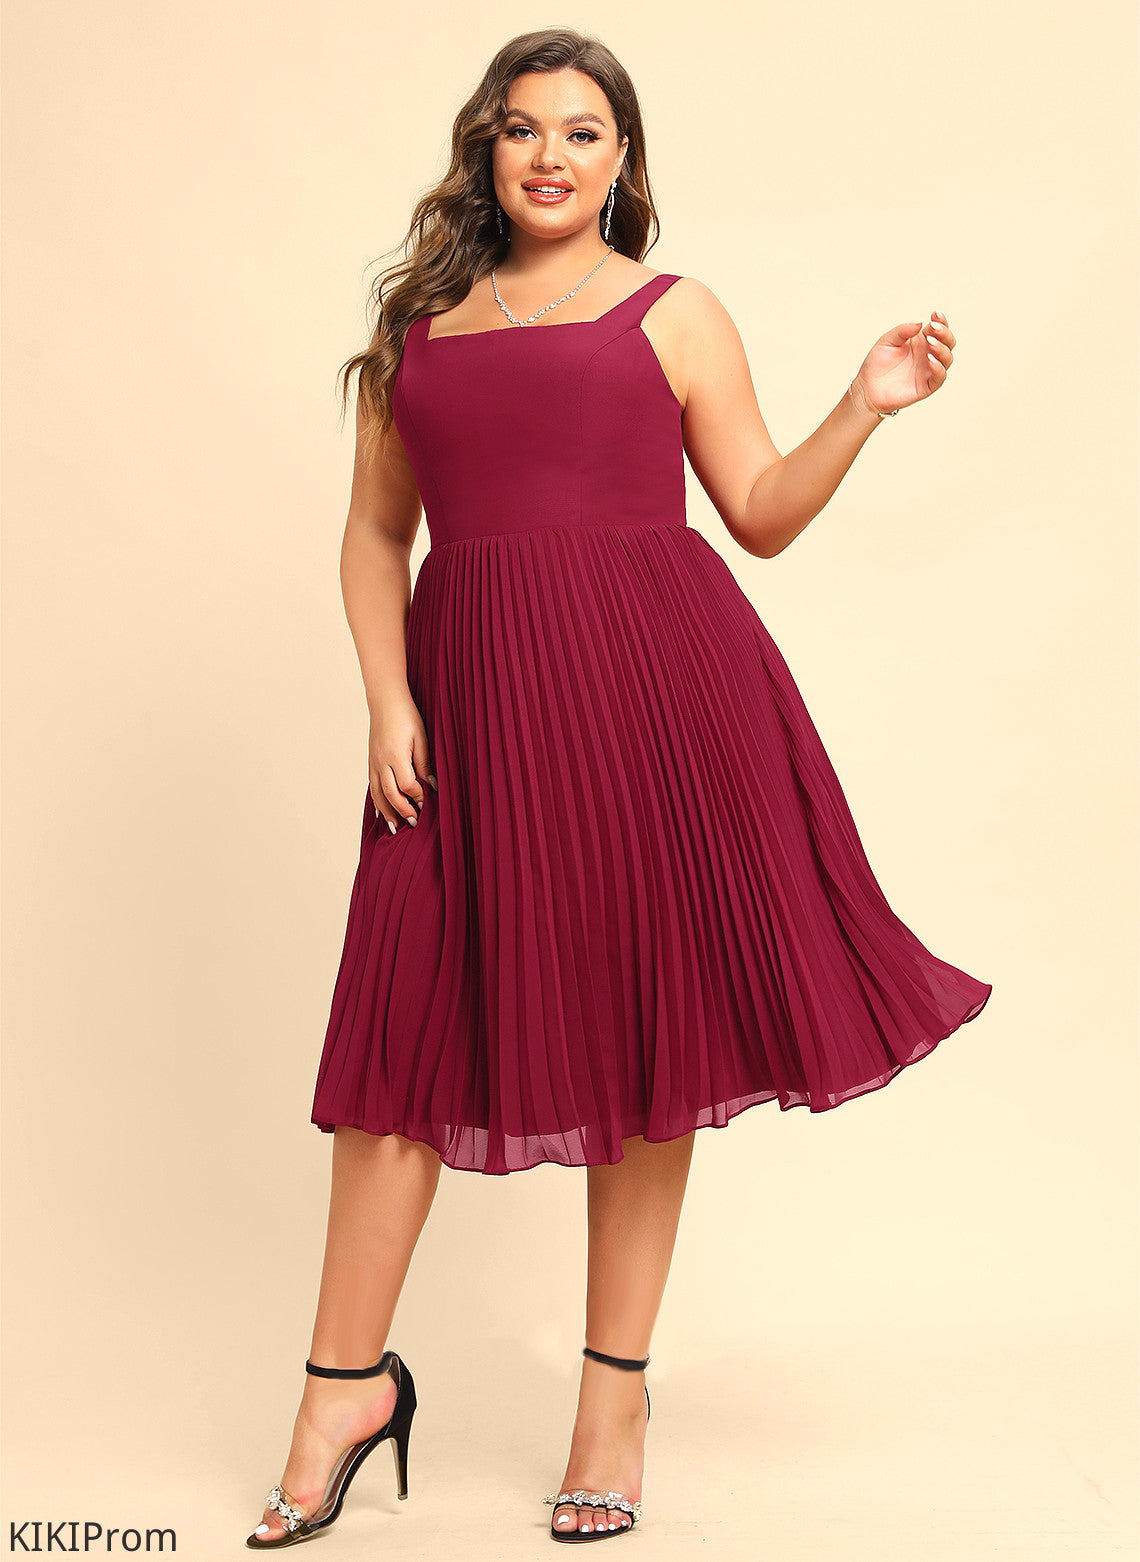 Pleated Neckline With Homecoming Dresses Chiffon Homecoming Square Knee-Length Judy Dress A-Line